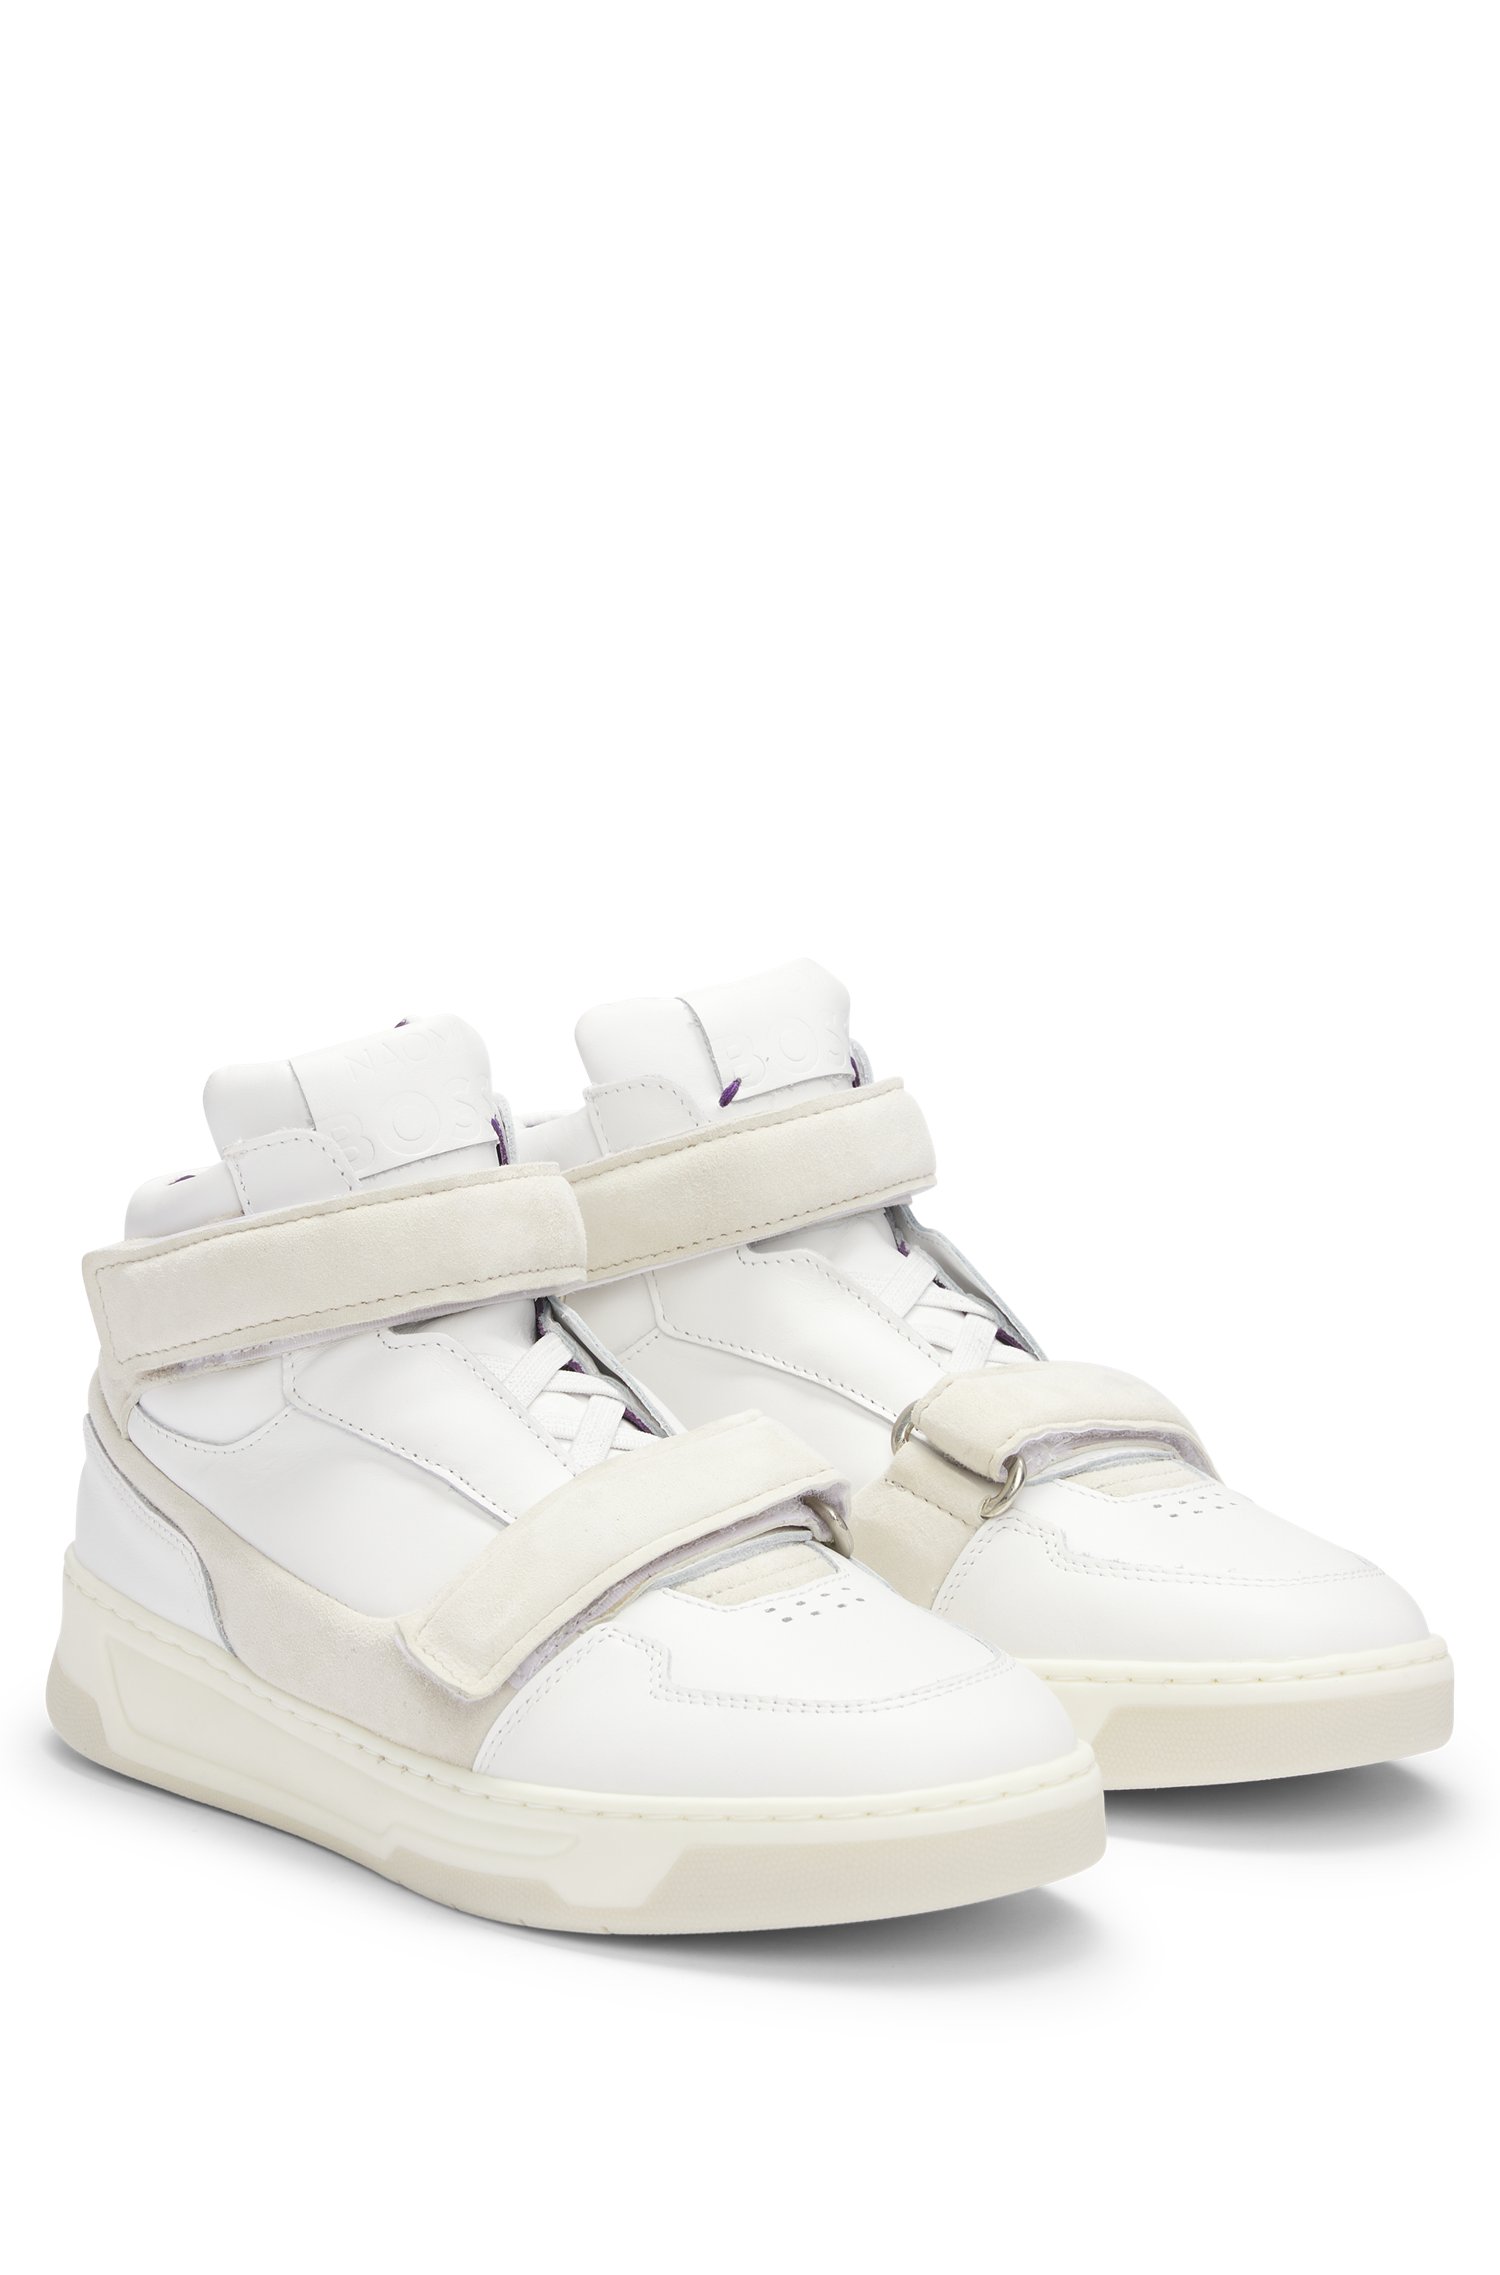 NAOMI x BOSS leather high-top trainers with riptape straps